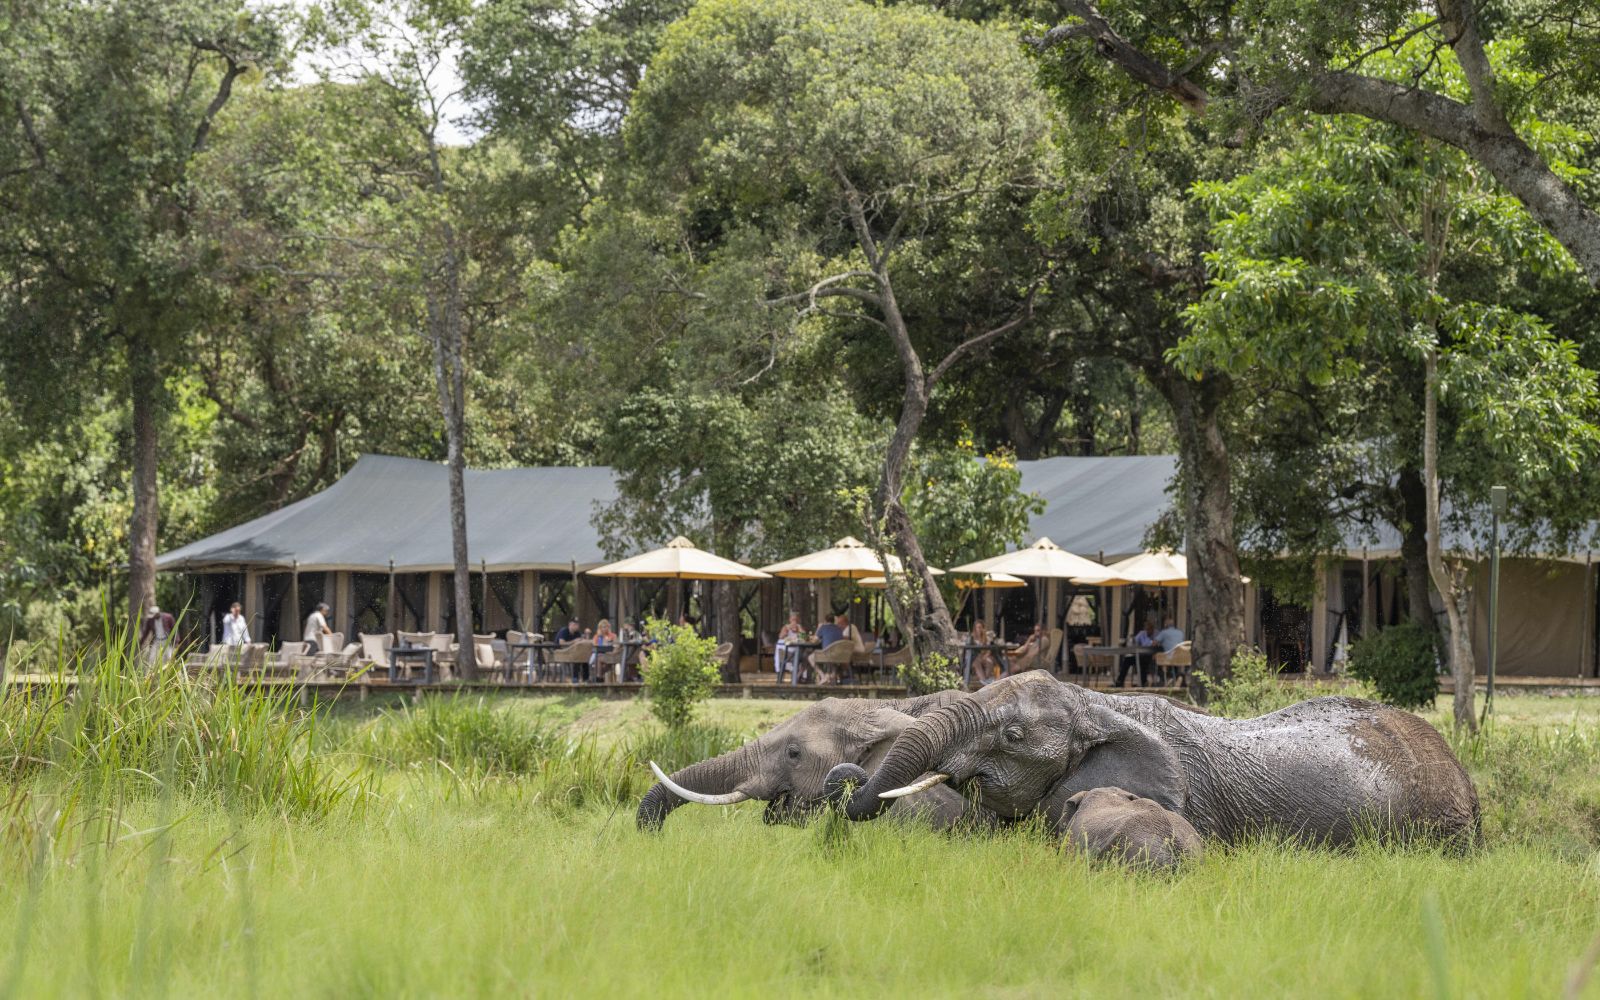 Elephants roaming around at Little Governors Camp, Kenya